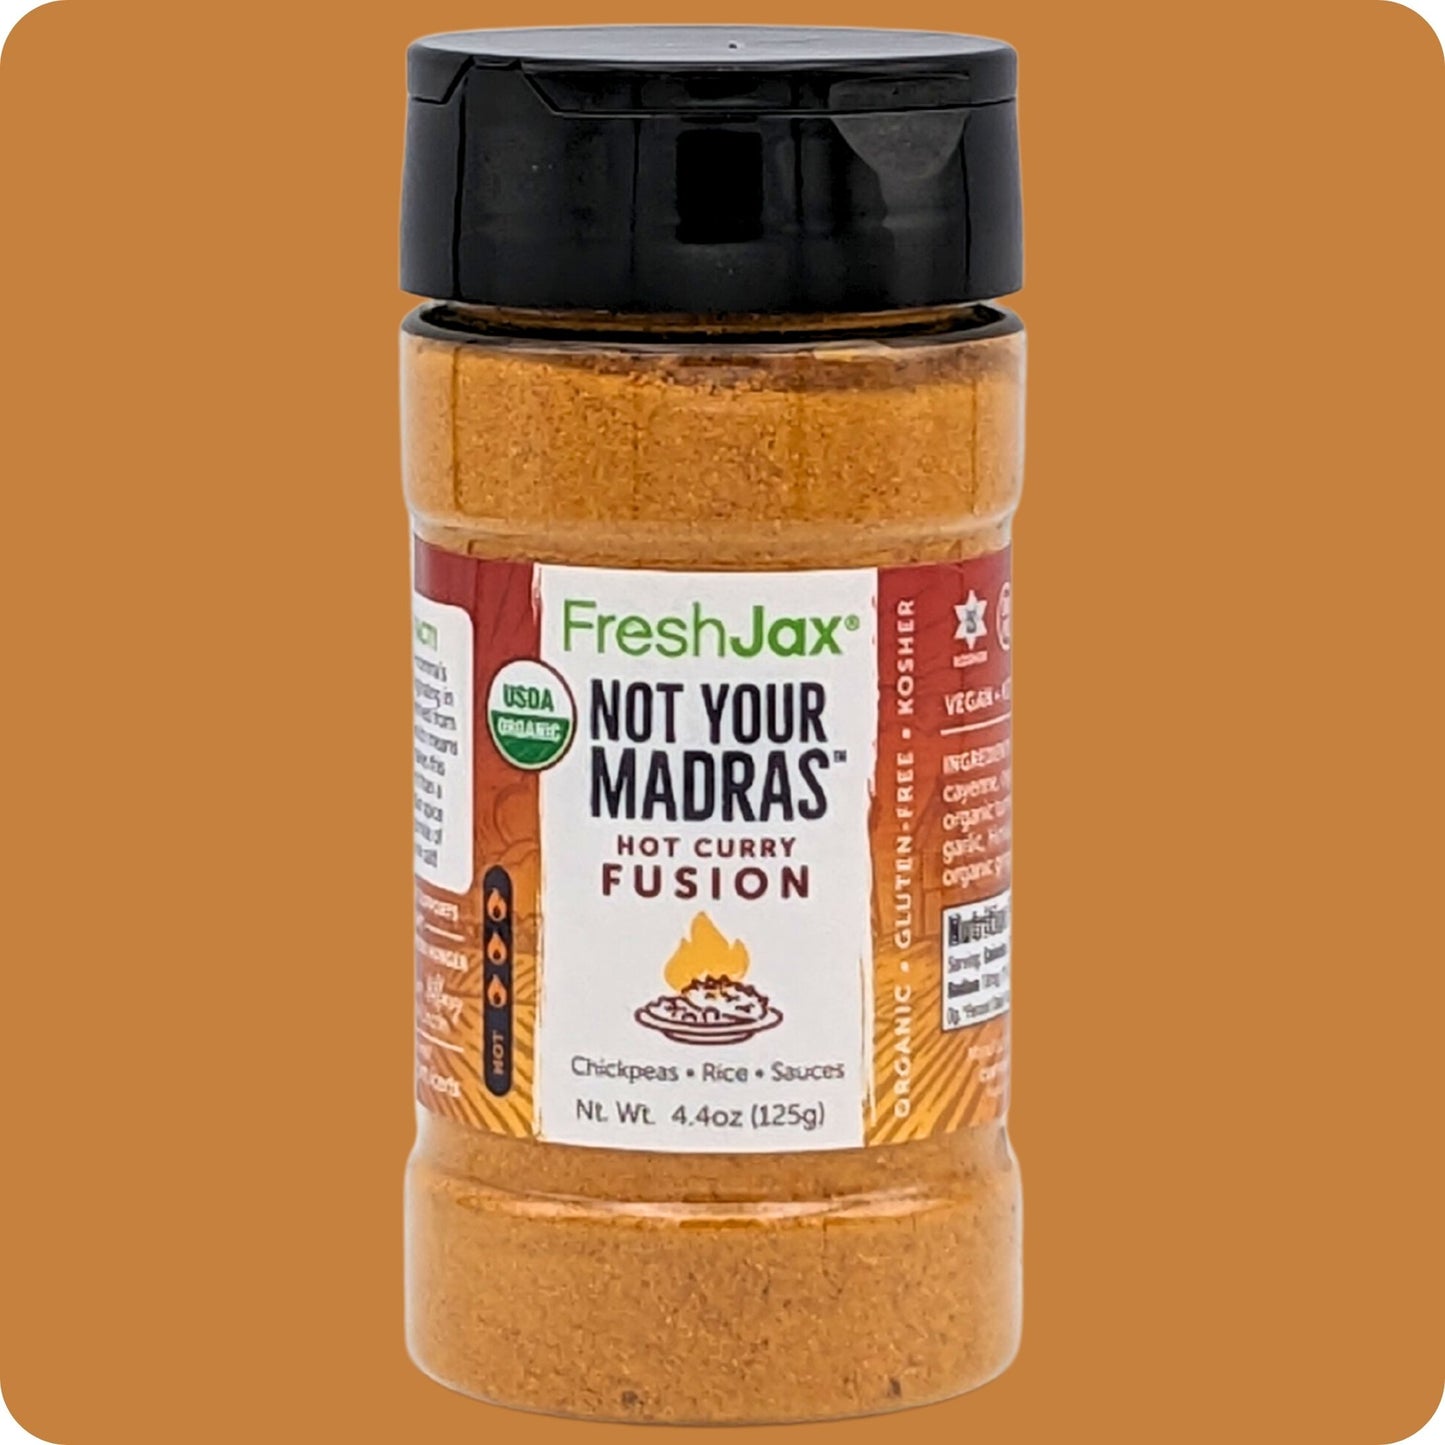 FreshJax Organic Spices Not Your Madras Hot Curry Fusion